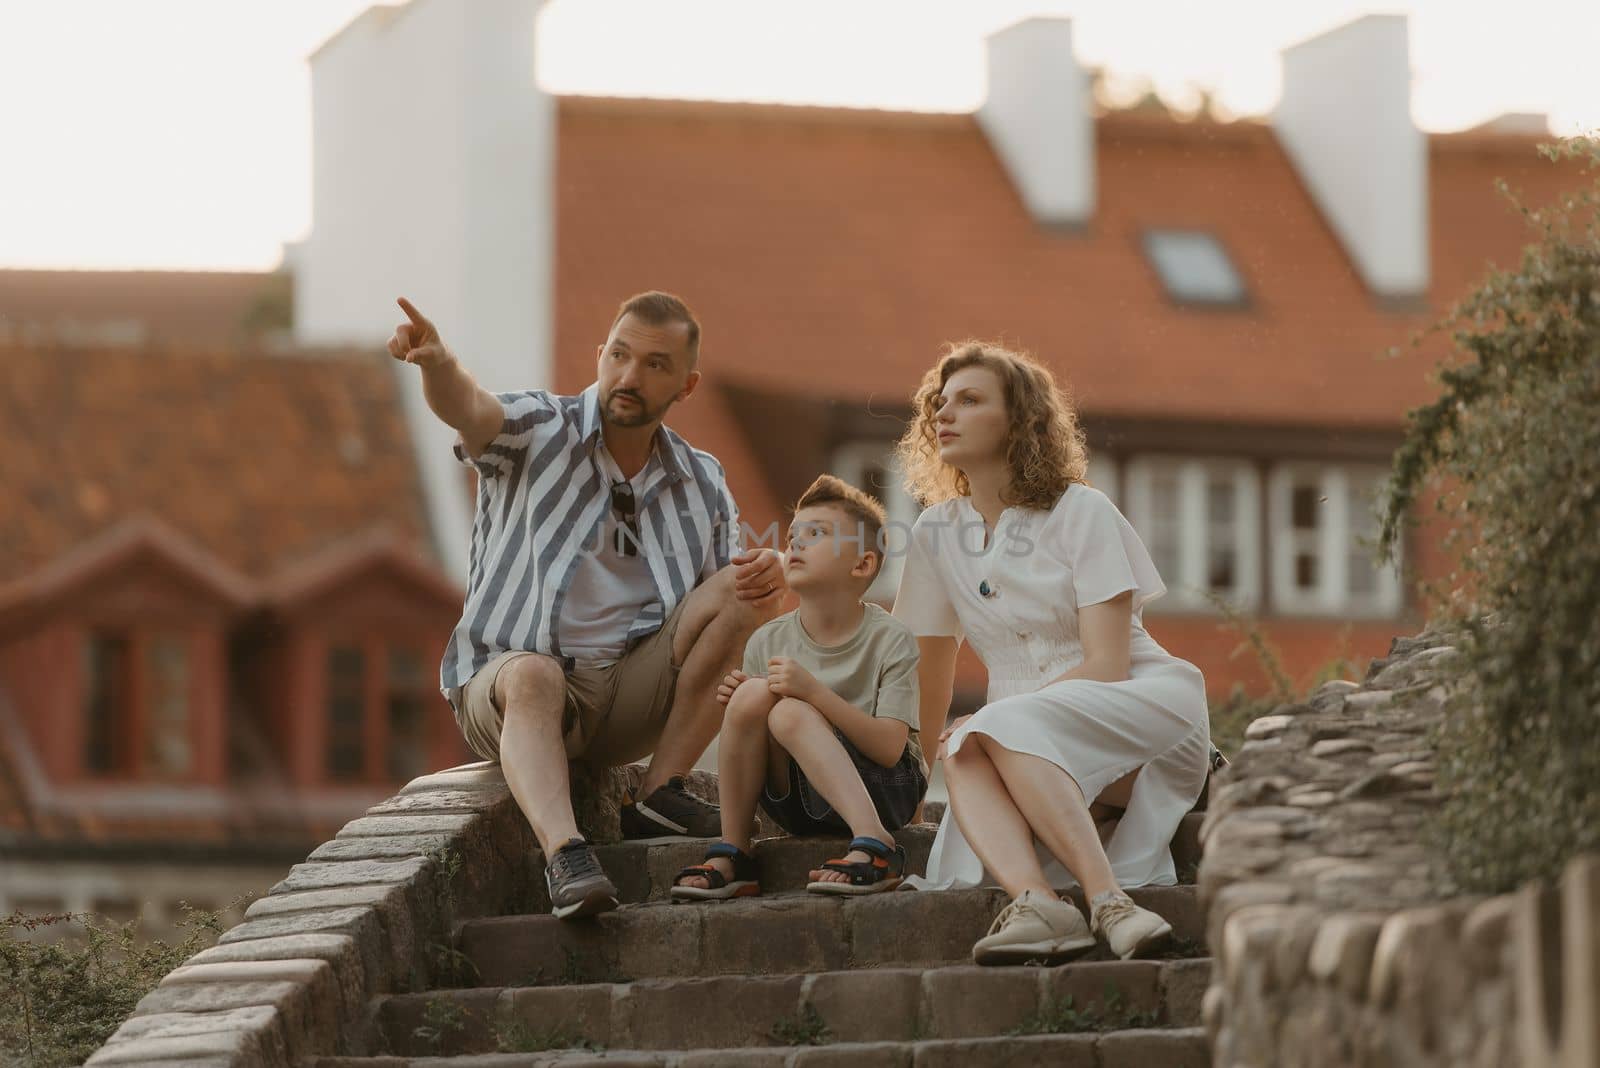 A family is speaking on the stairs between roofs in an old European town. A happy father, mother, and son are having fun in the evening.